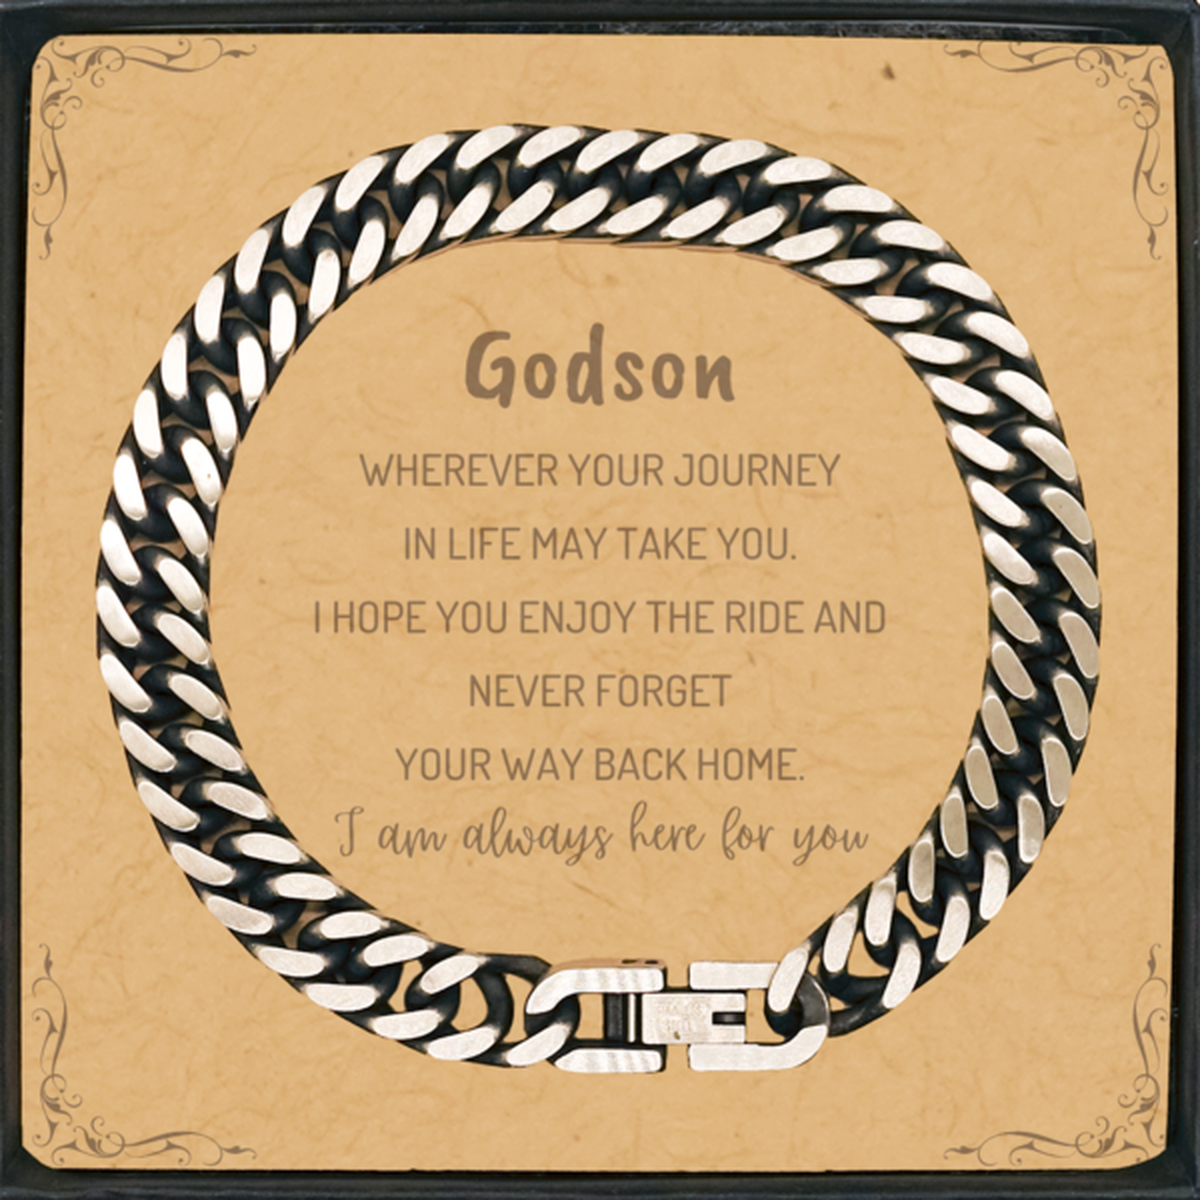 Godson wherever your journey in life may take you, I am always here for you Godson Cuban Link Chain Bracelet, Awesome Christmas Gifts For Godson Message Card, Godson Birthday Gifts for Men Women Family Loved One